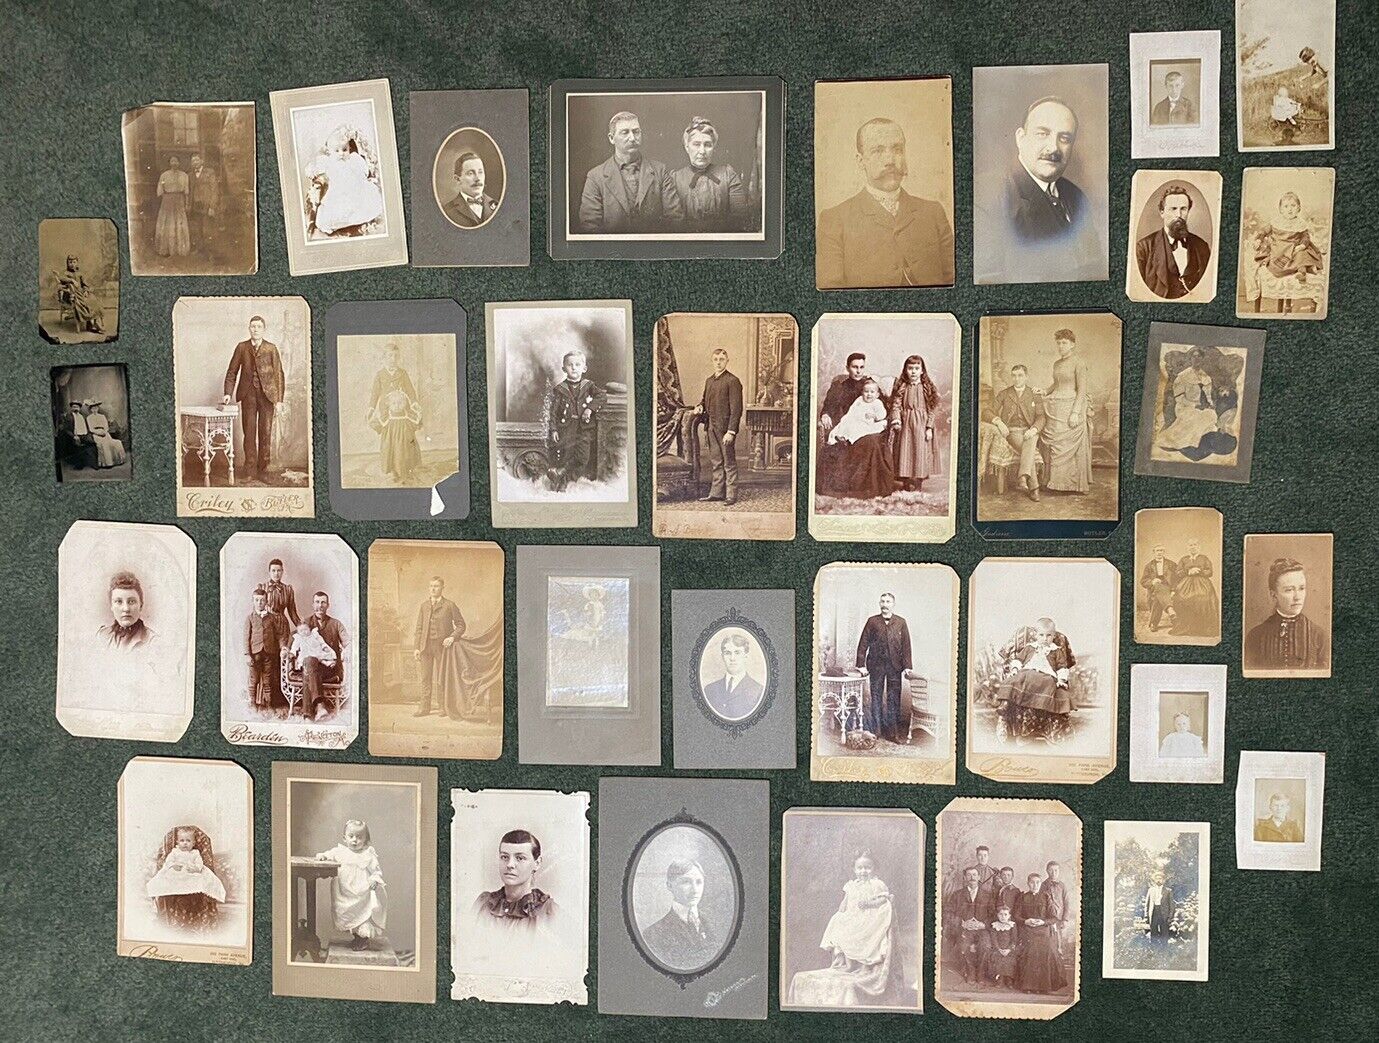 BUTLER PA Large LOT Of Antique Real Photos Cabinet Cards Tintypes 1800s 1 Family